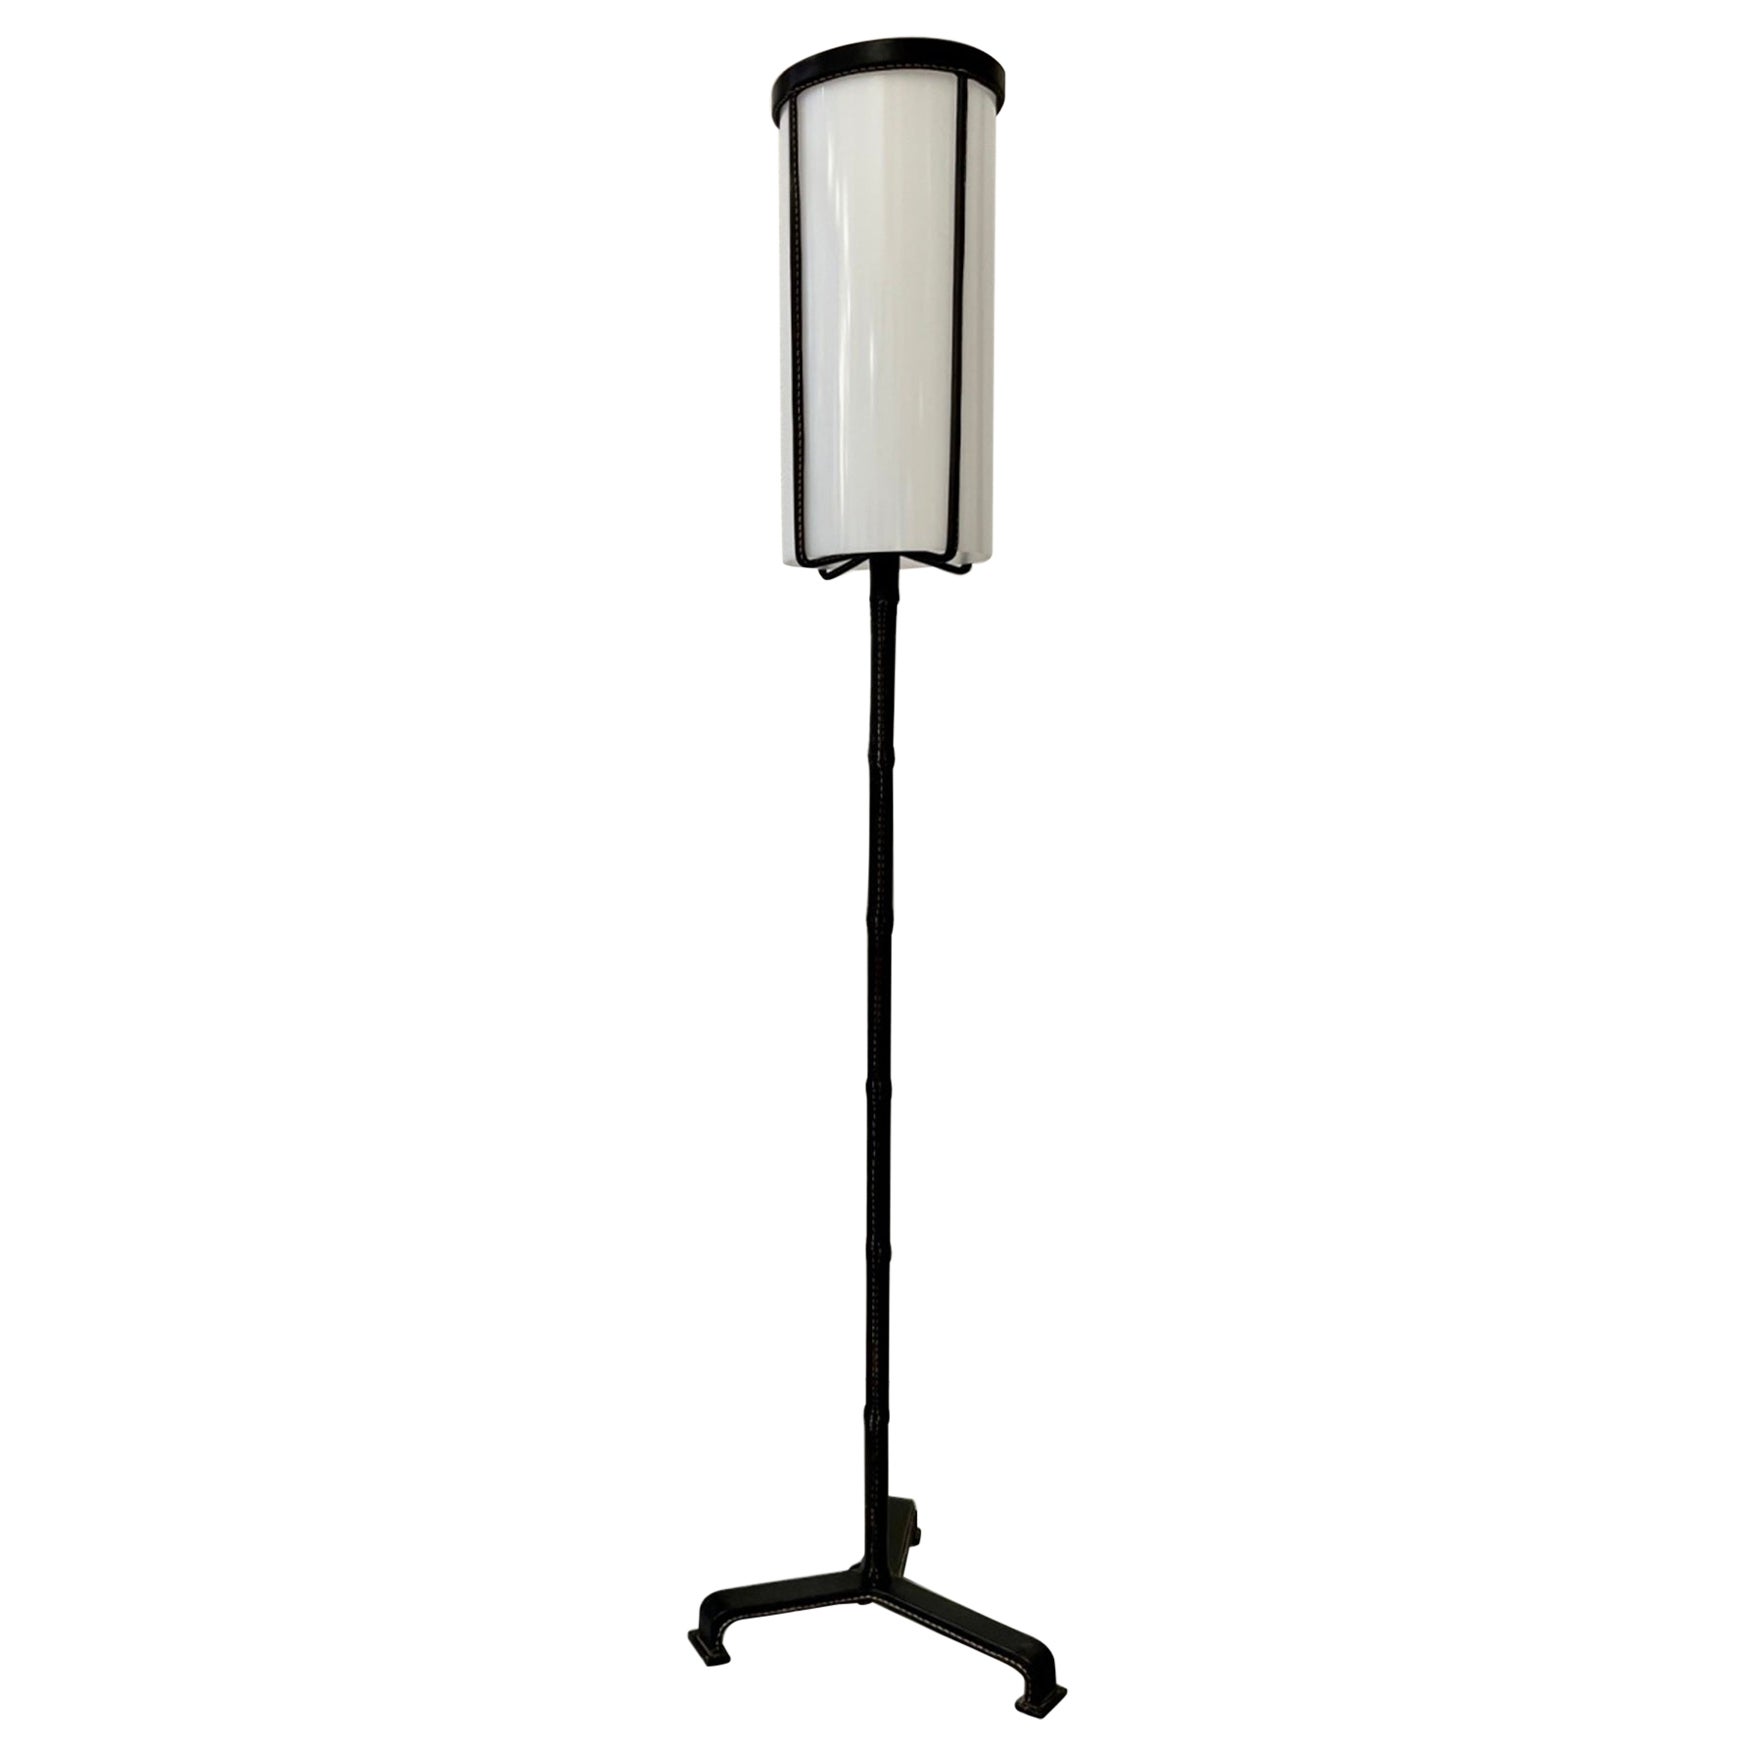 Leather Wrapped Tripod Standing Lamp by Jacques Adnet, France circa 1950